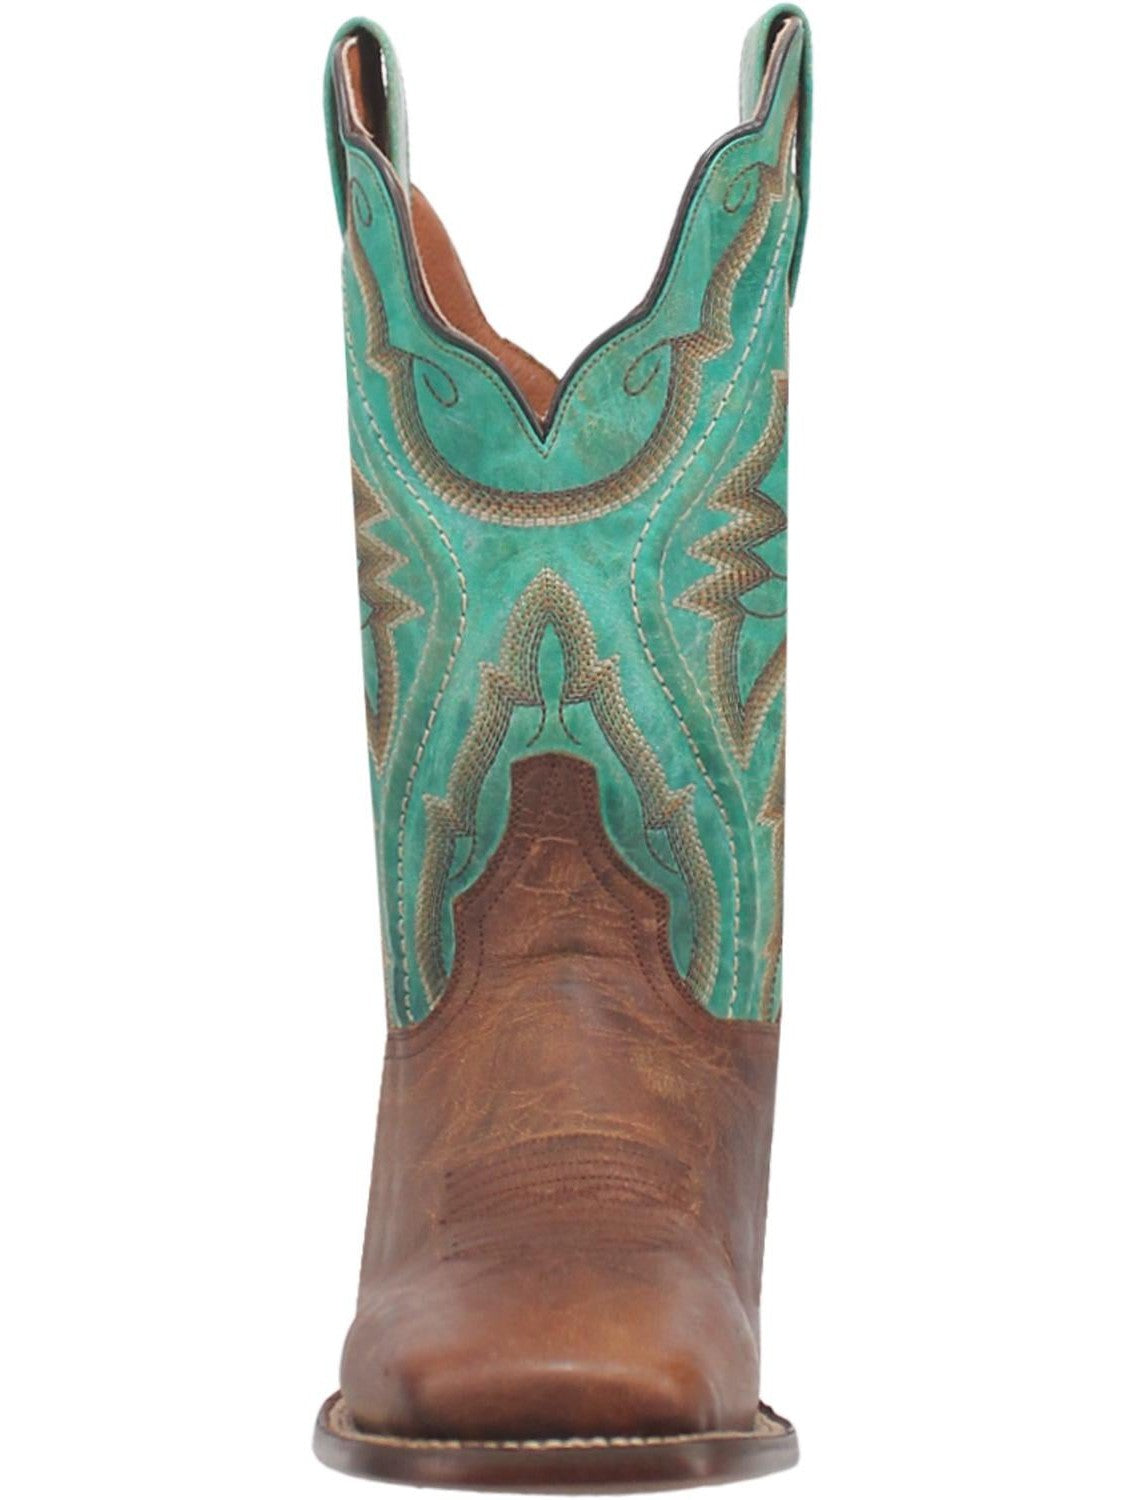 Babs Square Toe Boot by Dan Post - Brown and Teal